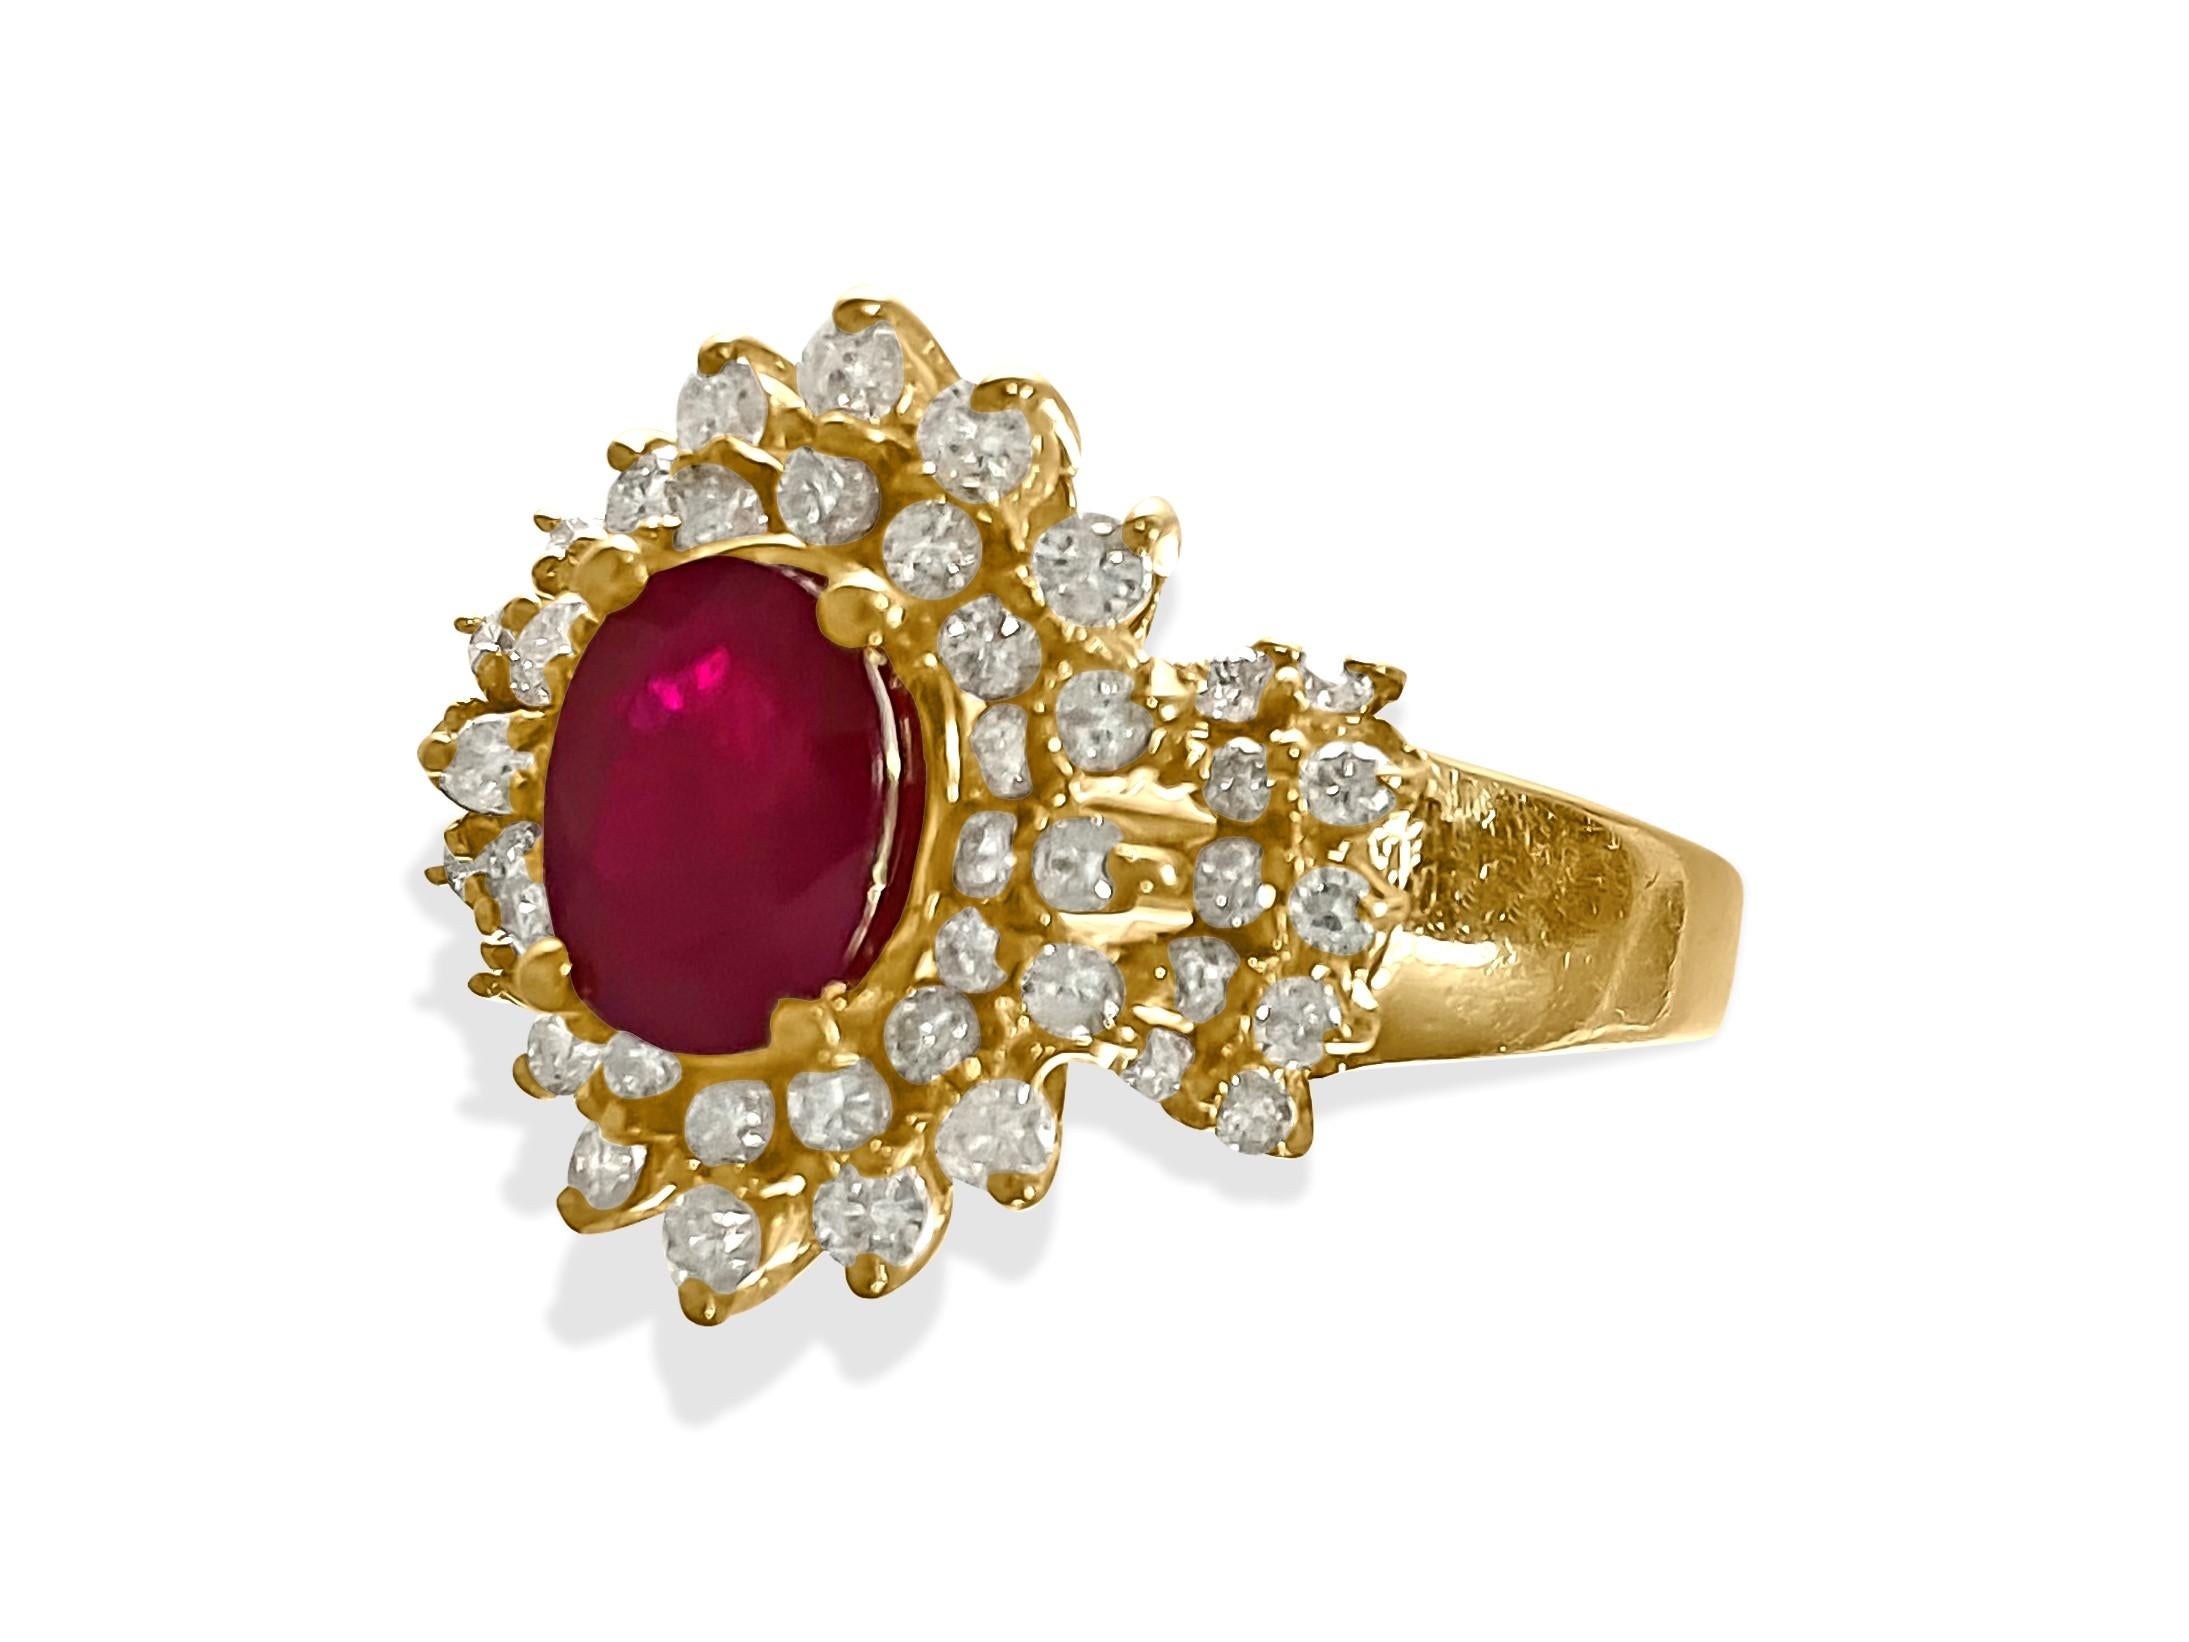 This is a ring made of 14K yellow gold. In the middle, there's a 2.00 carat Burma ruby, which is a natural gemstone. It's oval-shaped and has really nice color. The ring also has 2.25 carats of diamonds in total. These diamonds are round and have